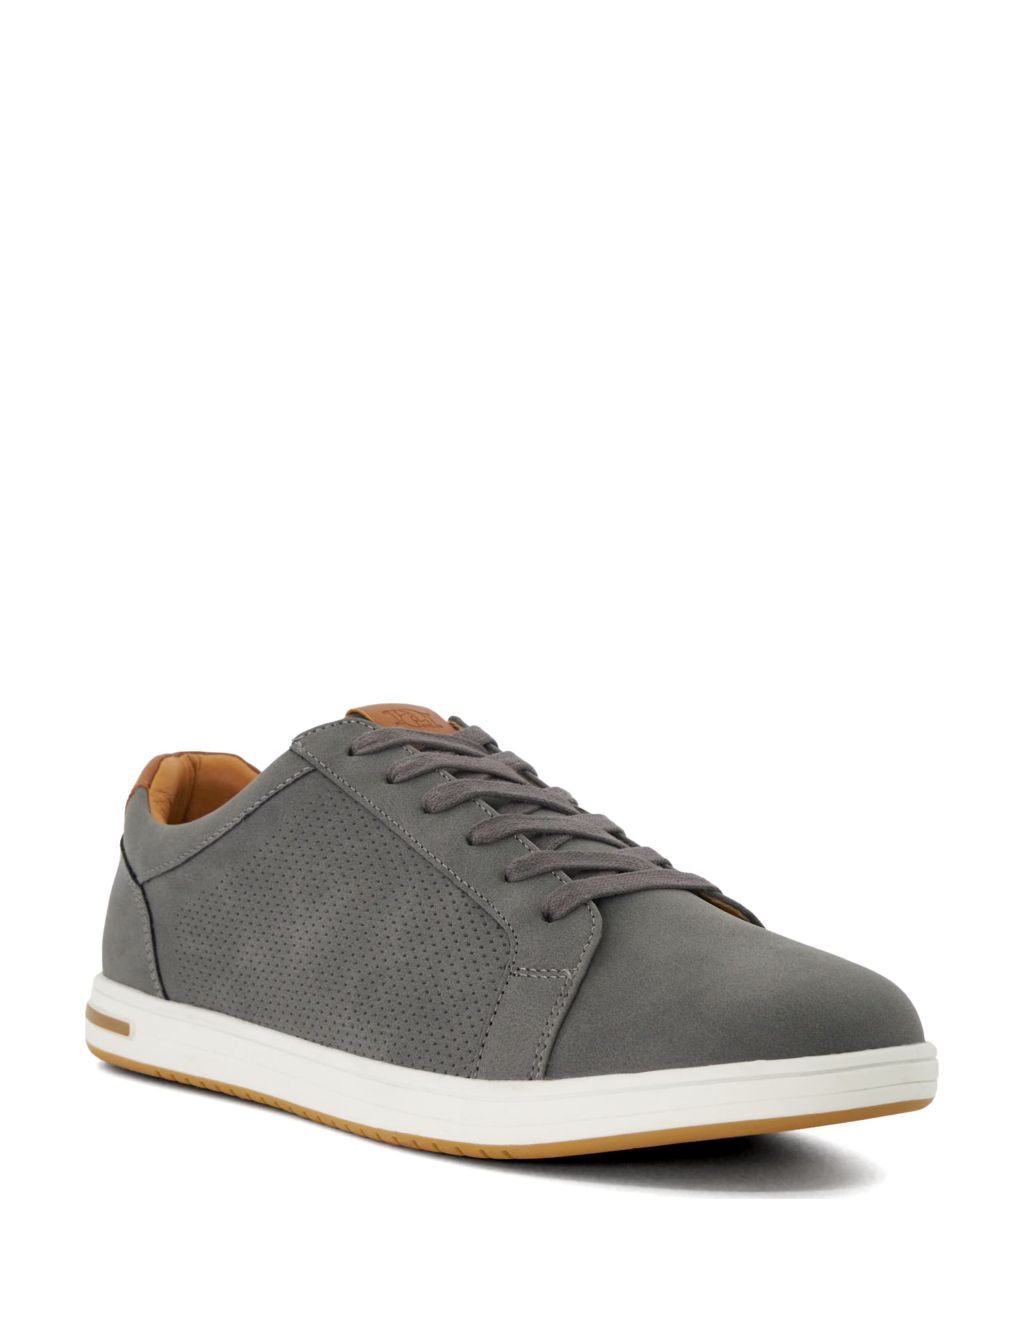 Buy Wide Fit Lace Up Trainers | Dune London | M&S